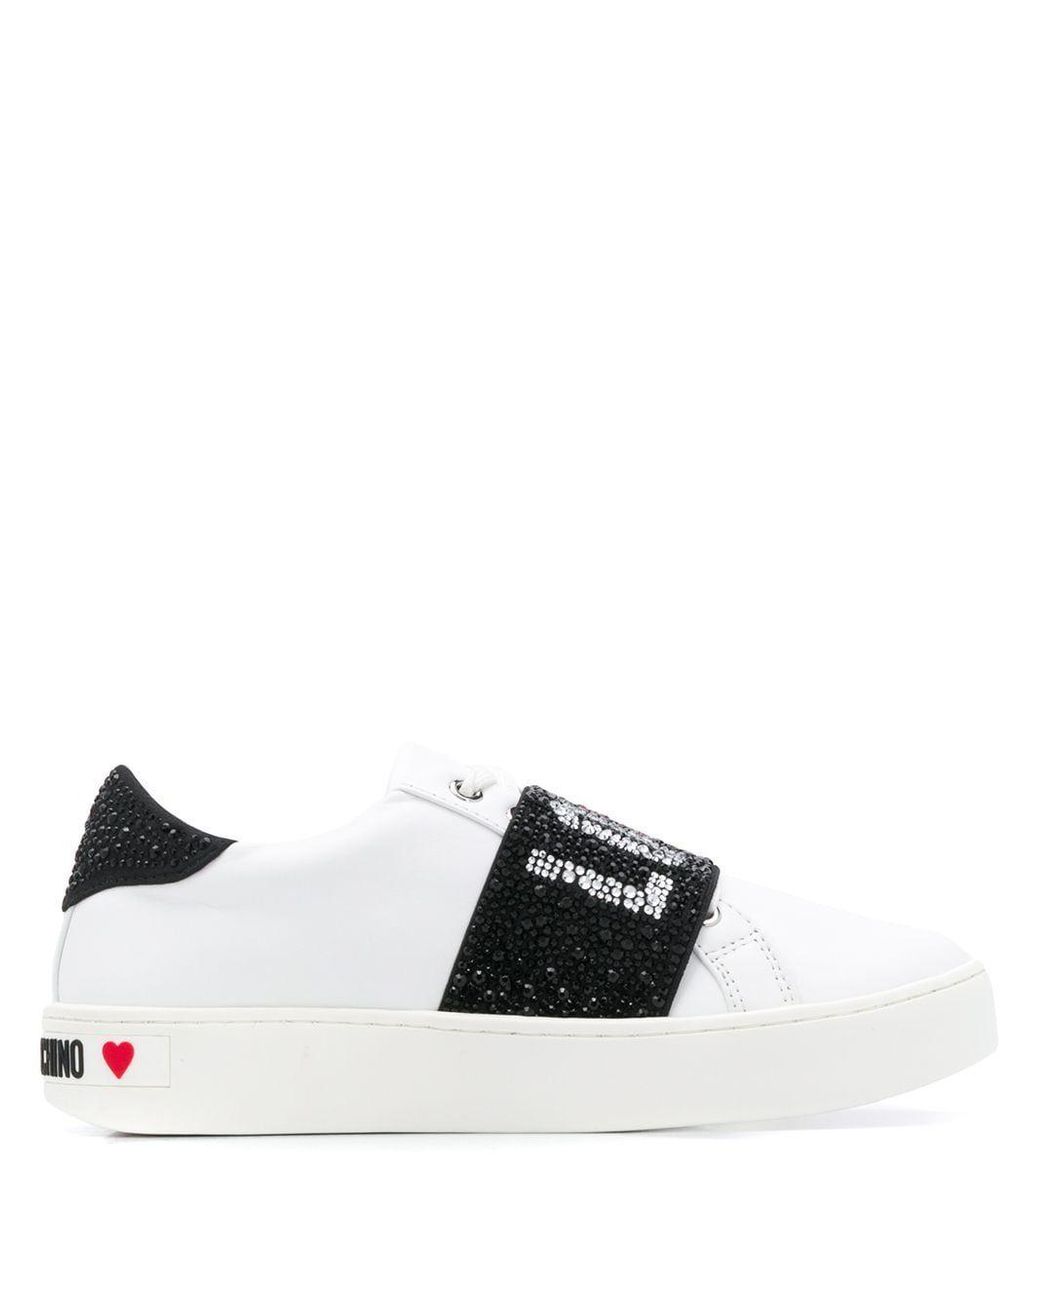 Moschino Leather Sneakers in White - Lyst